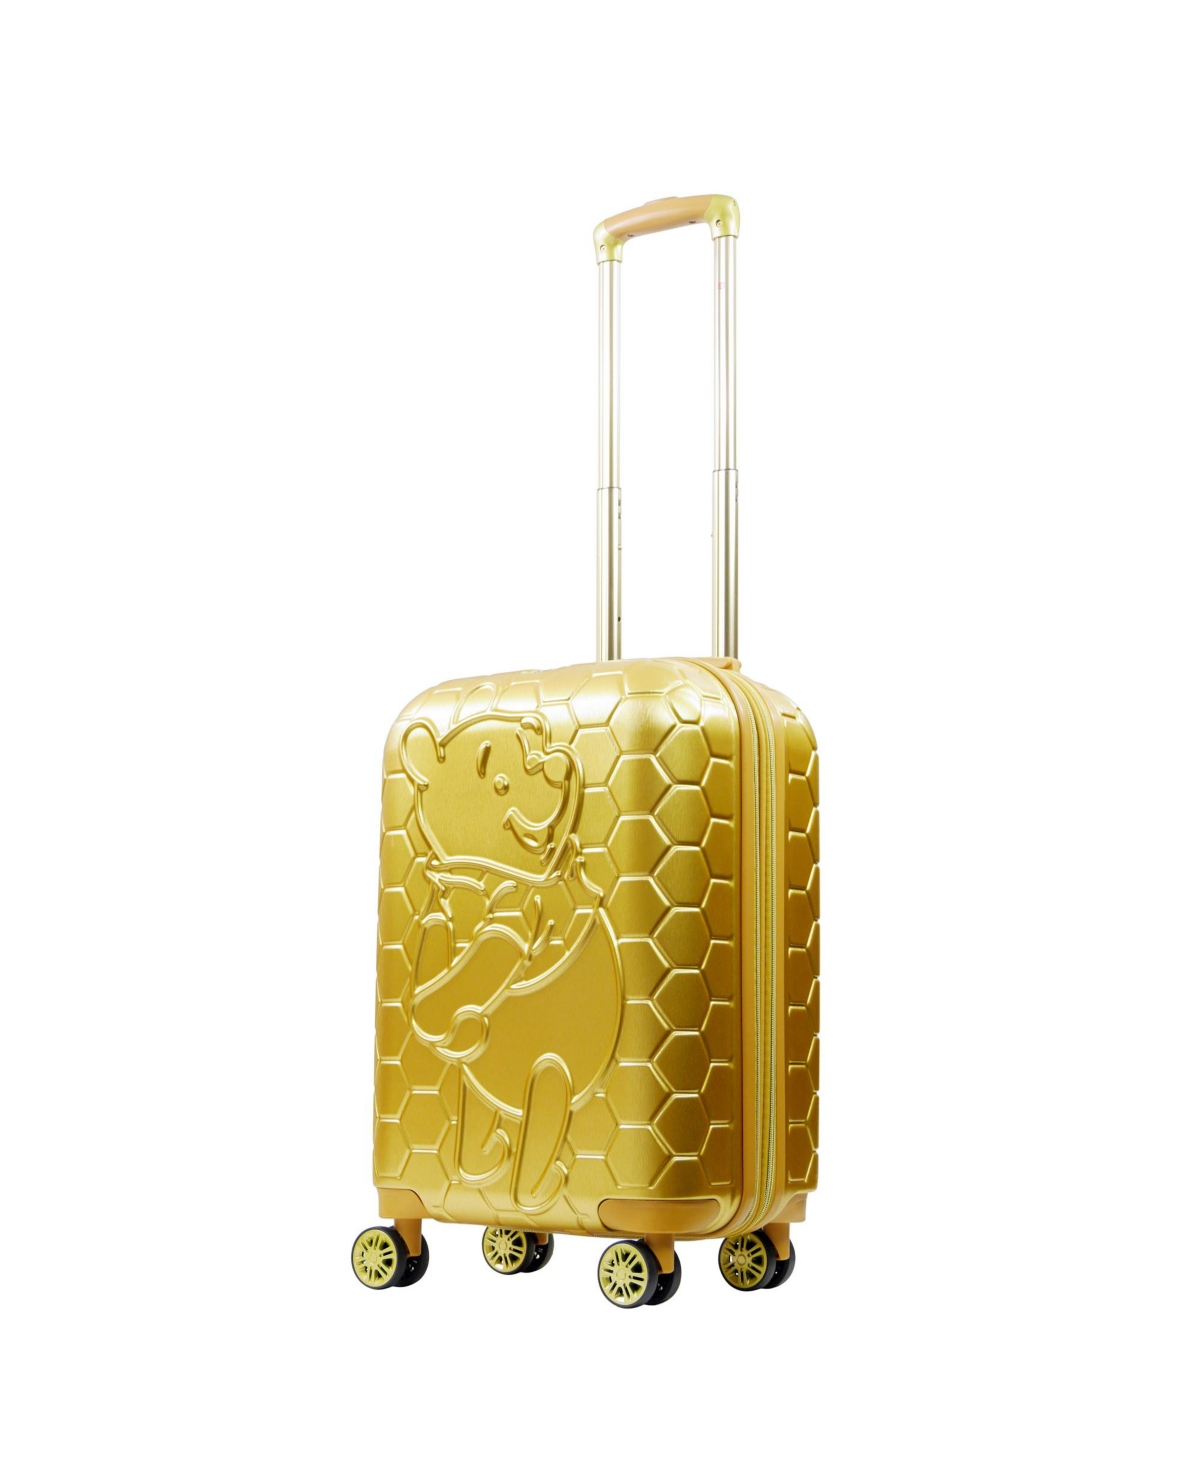 Disney Winnie the Pooh Molded 22.5 inch Carry-On Suitcase Spinner - Gold